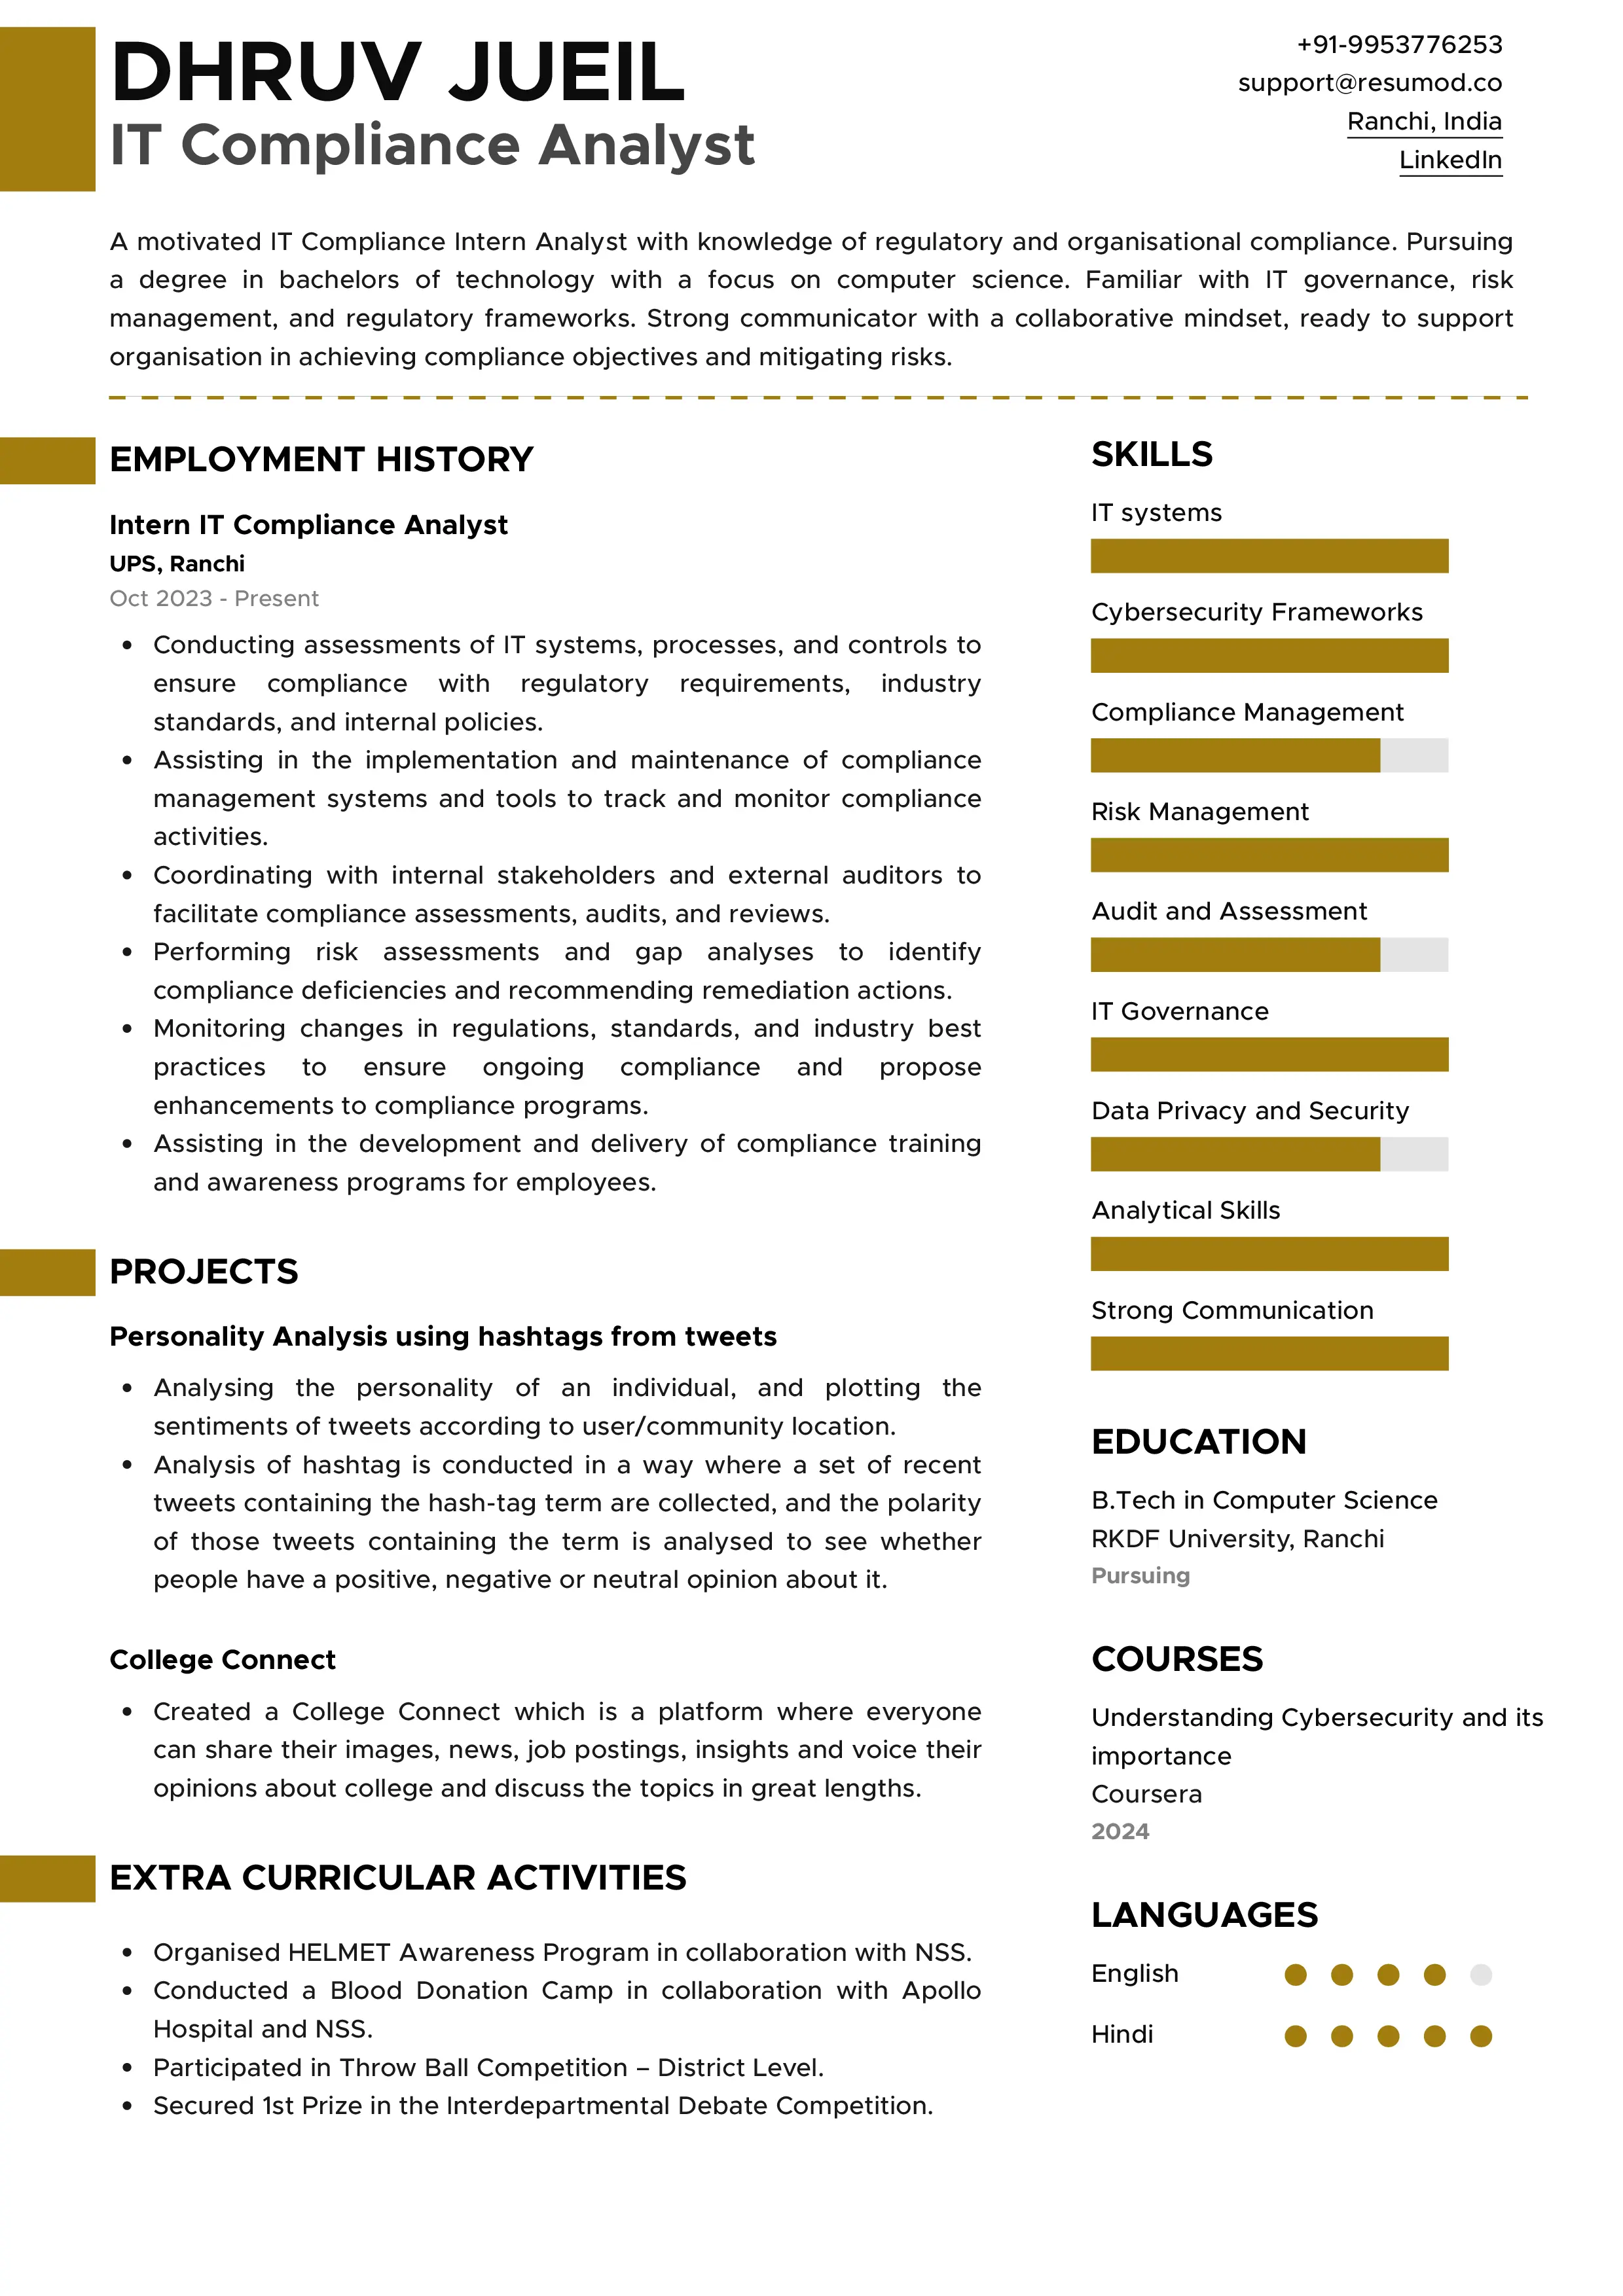 Sample Resume of IT Compliance Analyst | Free Resume Templates & Samples on Resumod.co